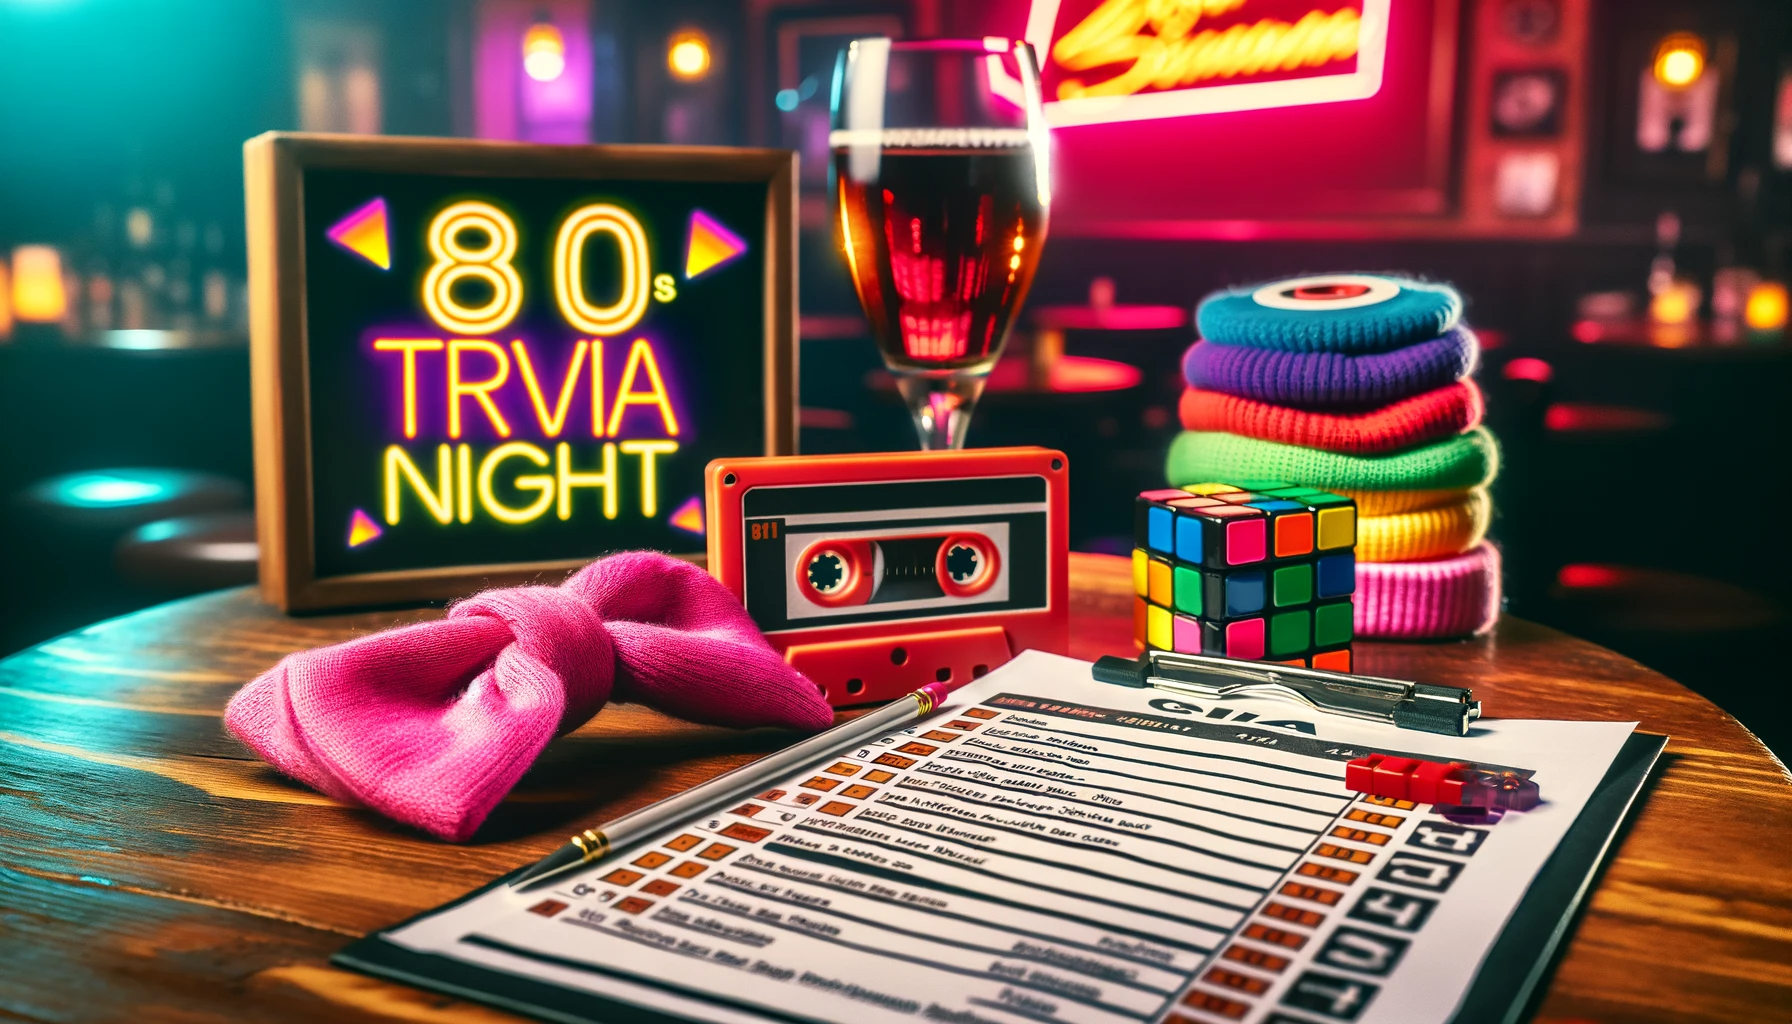 10 Ways to Make Your 80s Trivia Night a Roaring Success